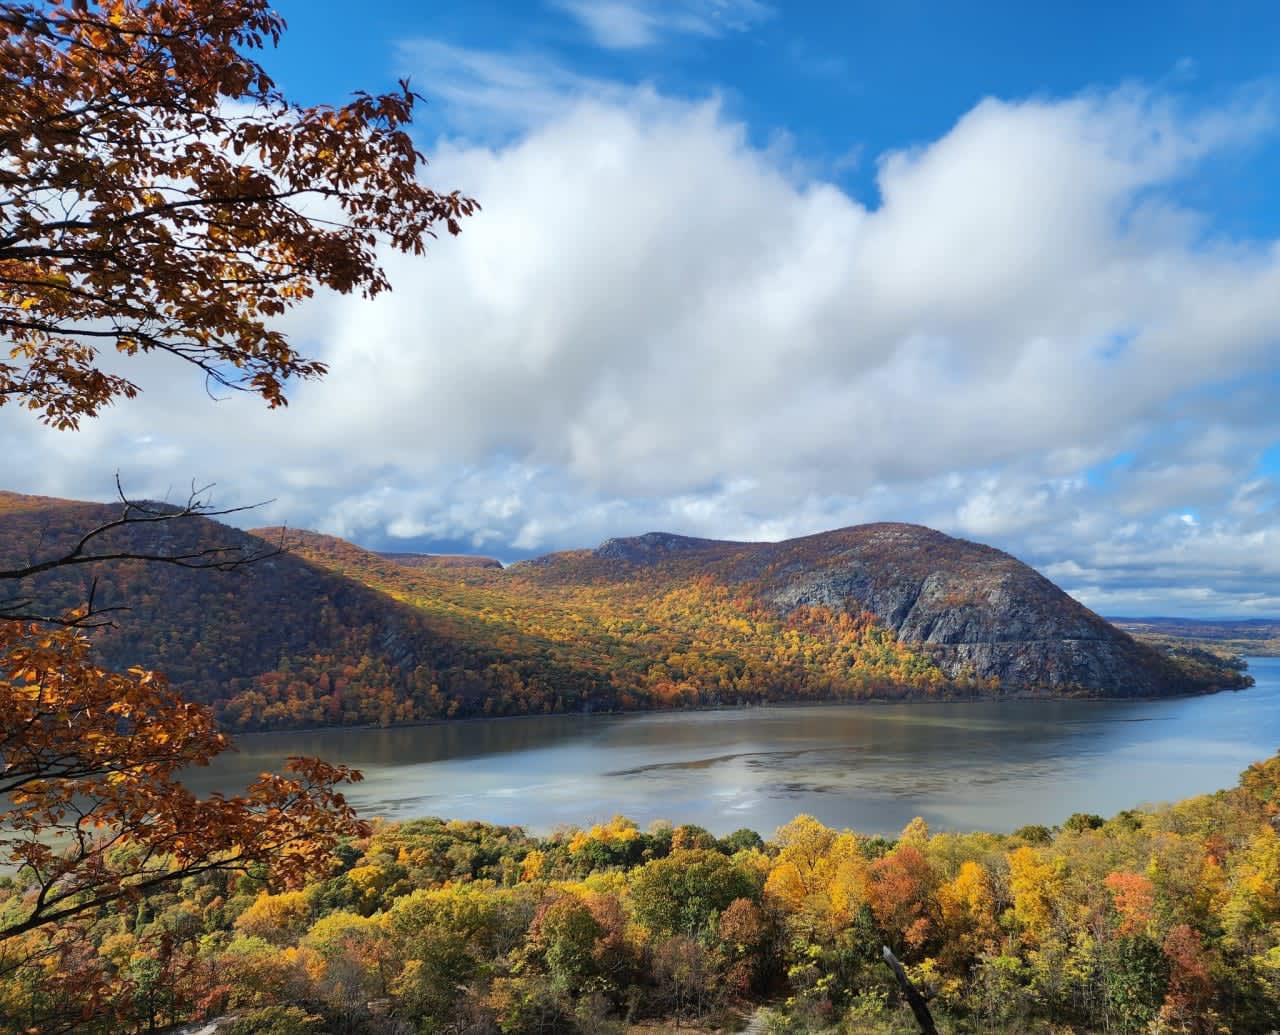 Fall foliage colors are peaking, according to the National Weather Service.